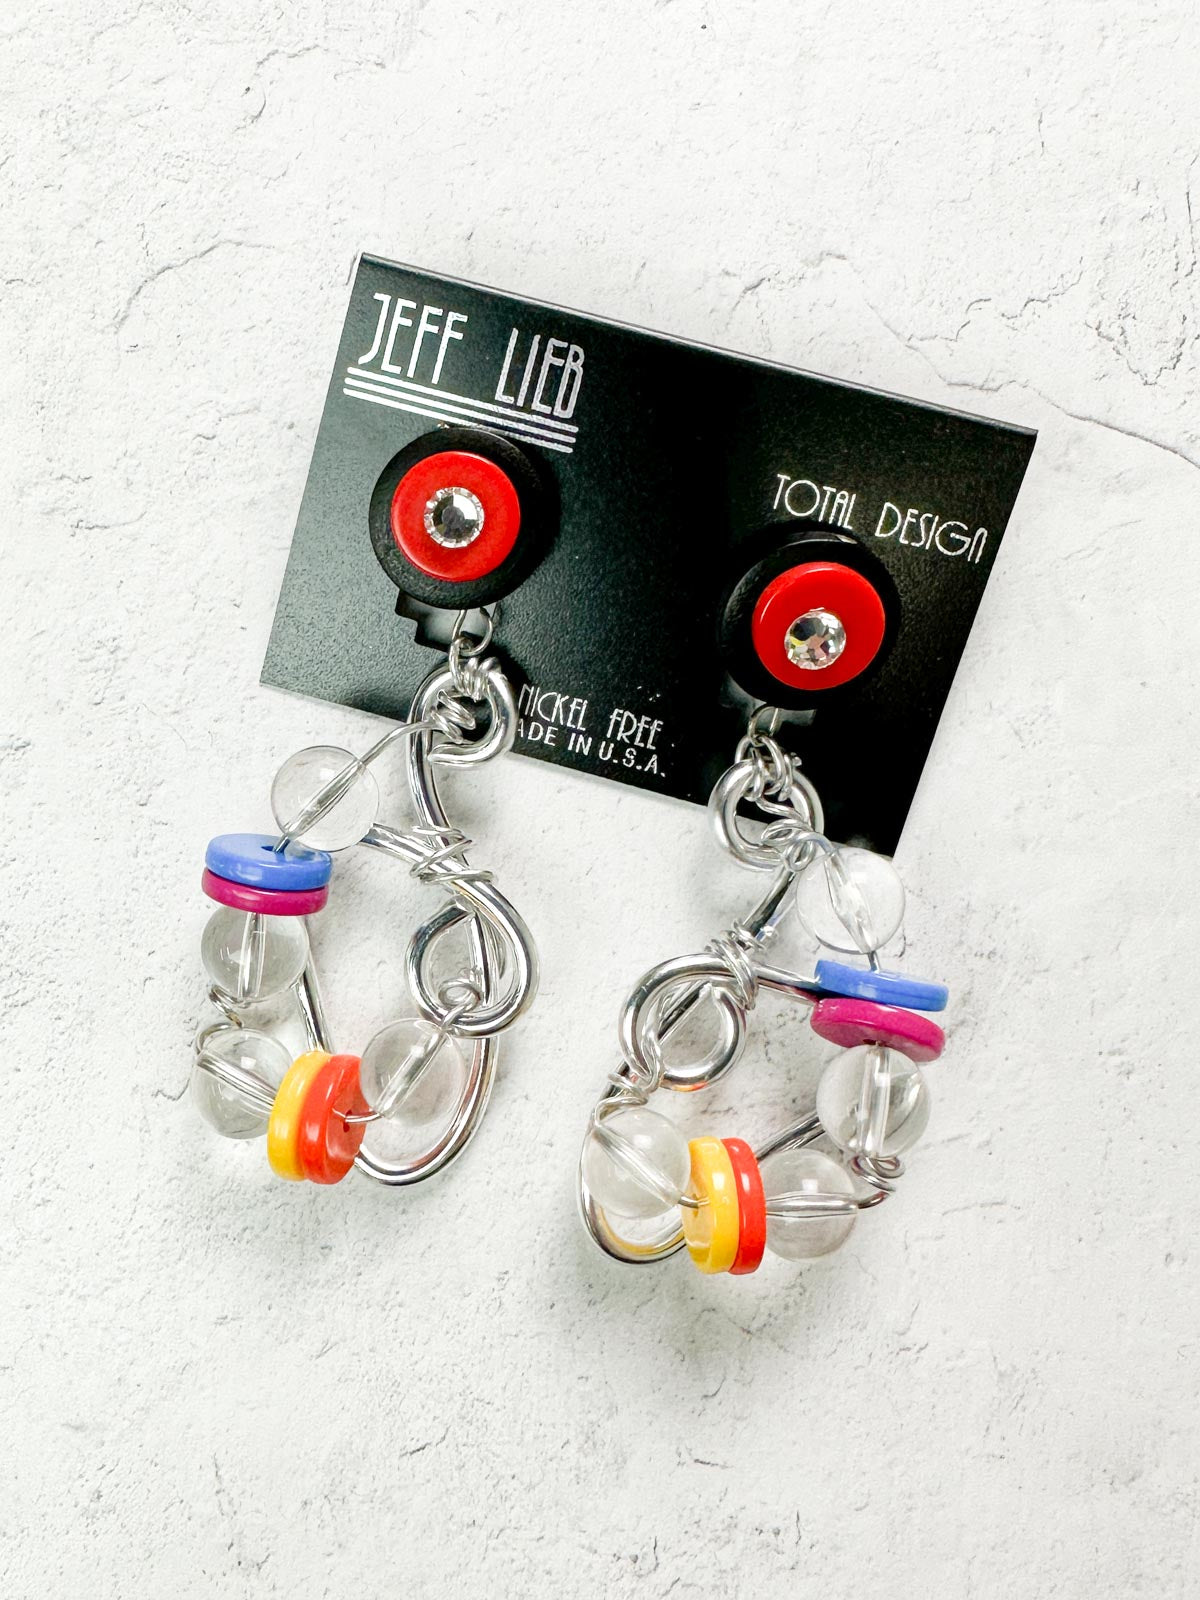 Jeff Lieb Total Design Jewelry Mixed Media Bead & Wire Clip On Earrings, Silver/Multi - Statement Boutique